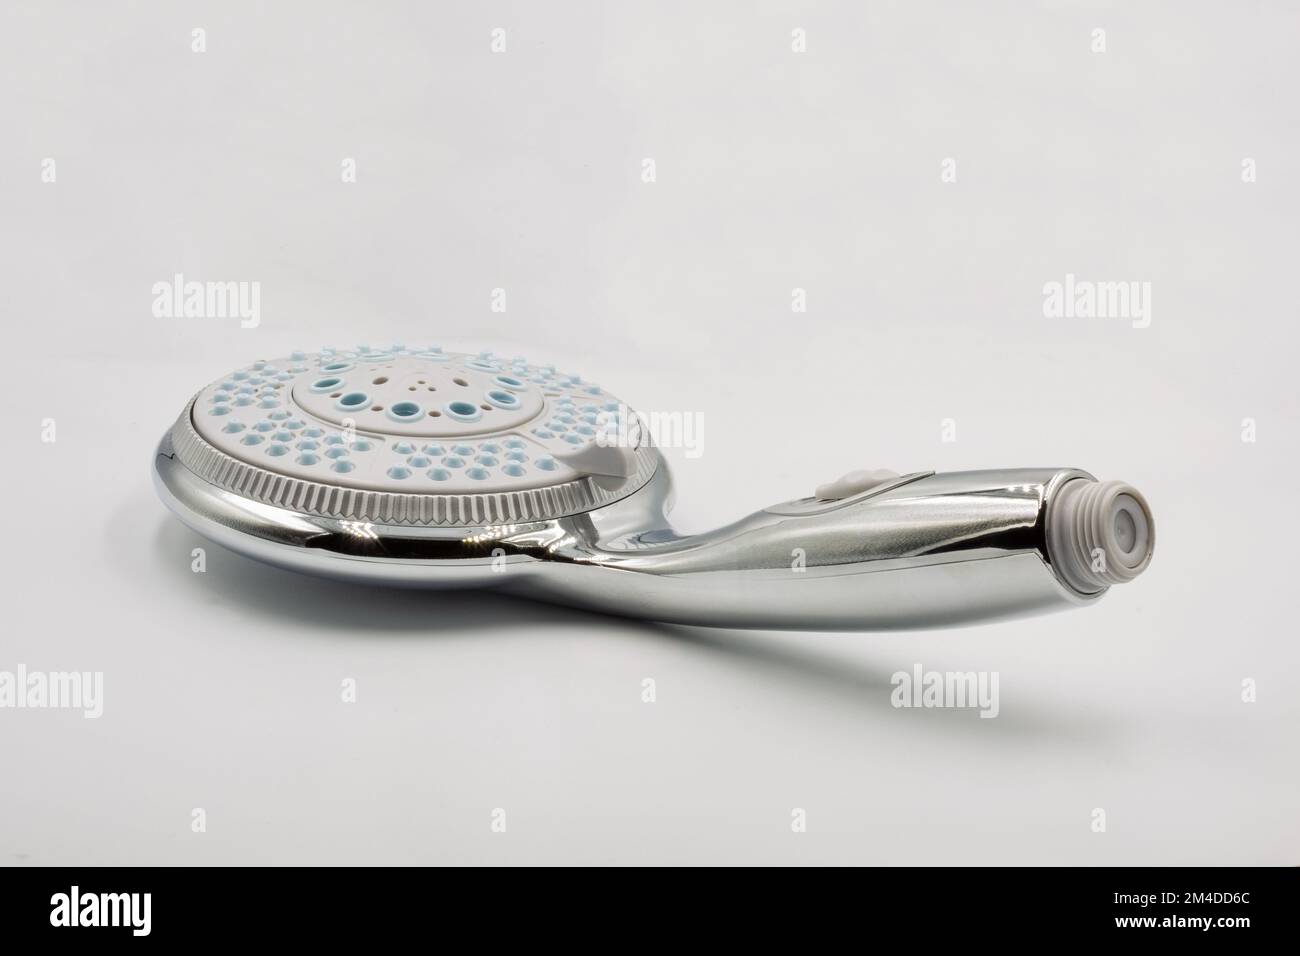 New shiny chrome metallic shower head with water spray adjustable closeup on white background Stock Photo